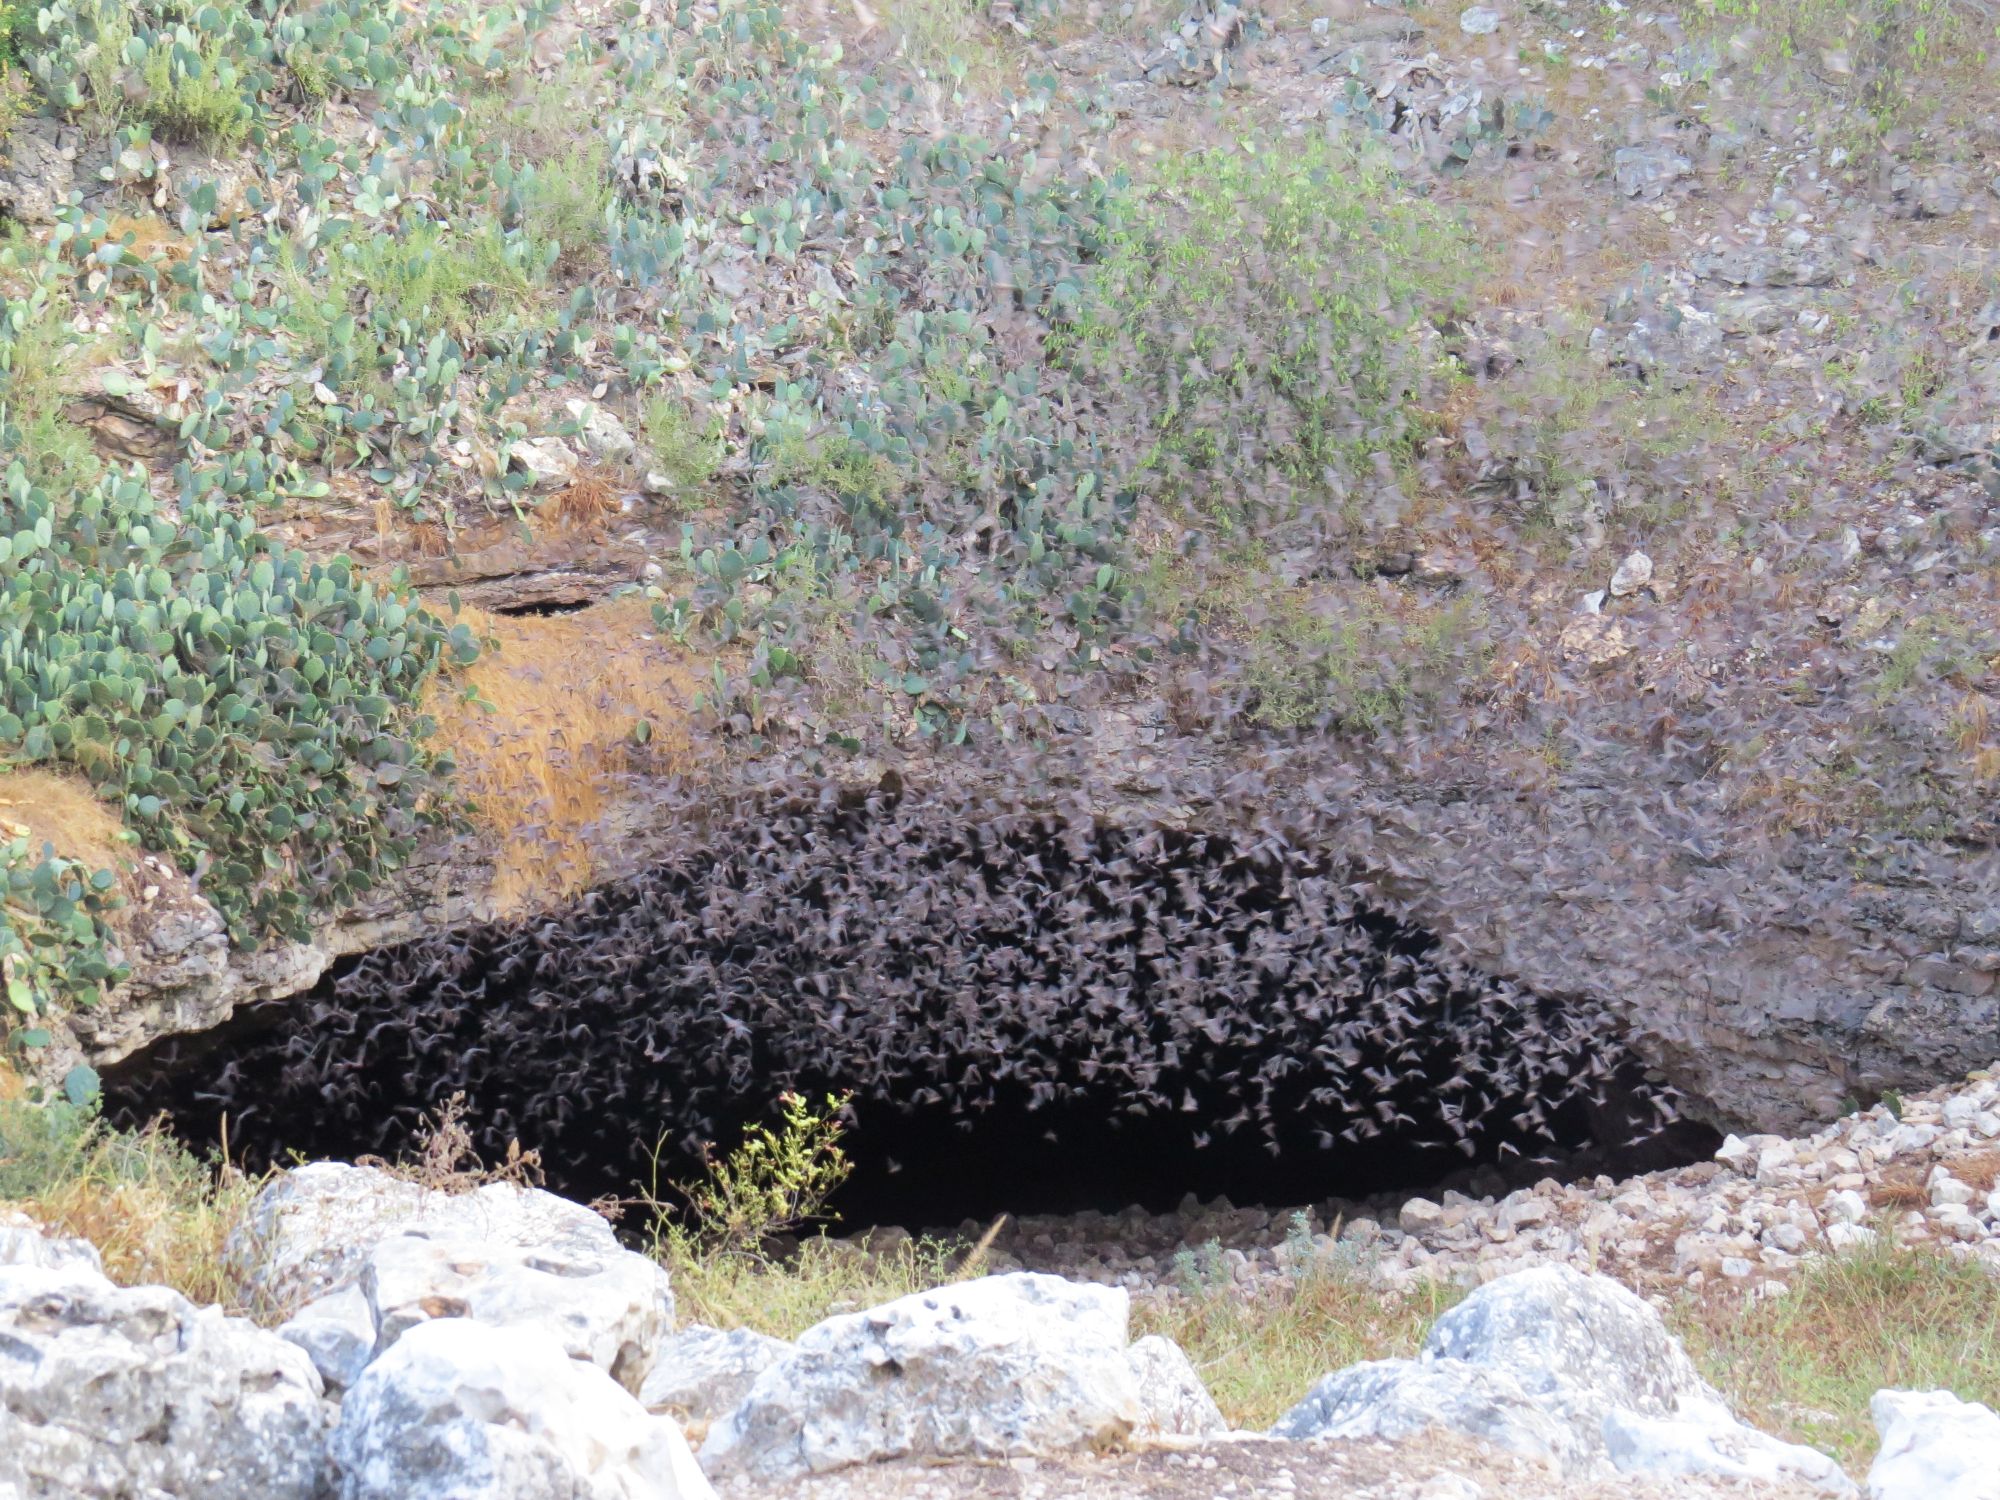 Bats Emerging from Cave